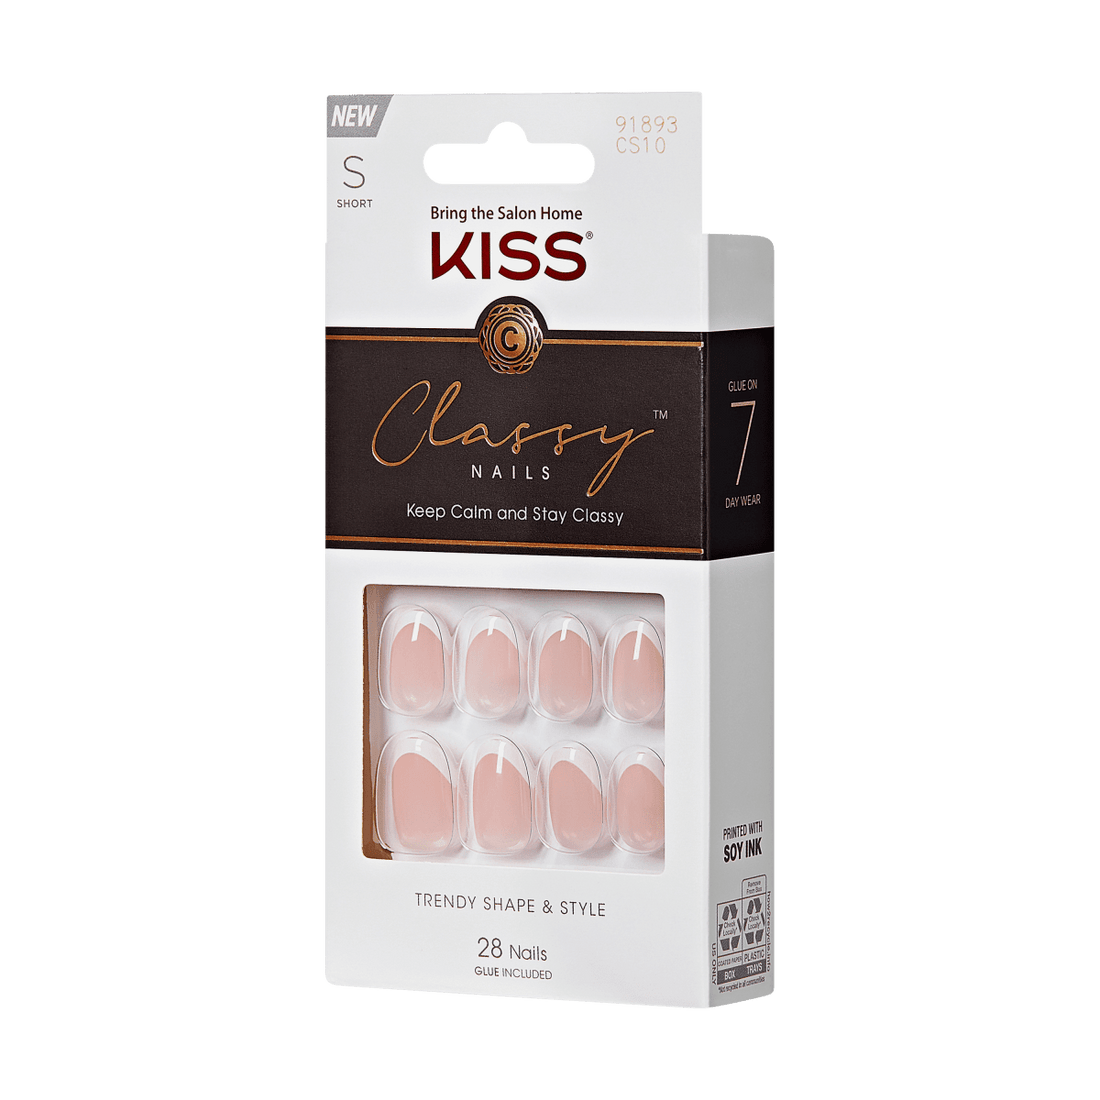 KISS Classy Nails, Press-On Nails, Exclusive Only, White, Short Oval, 28ct